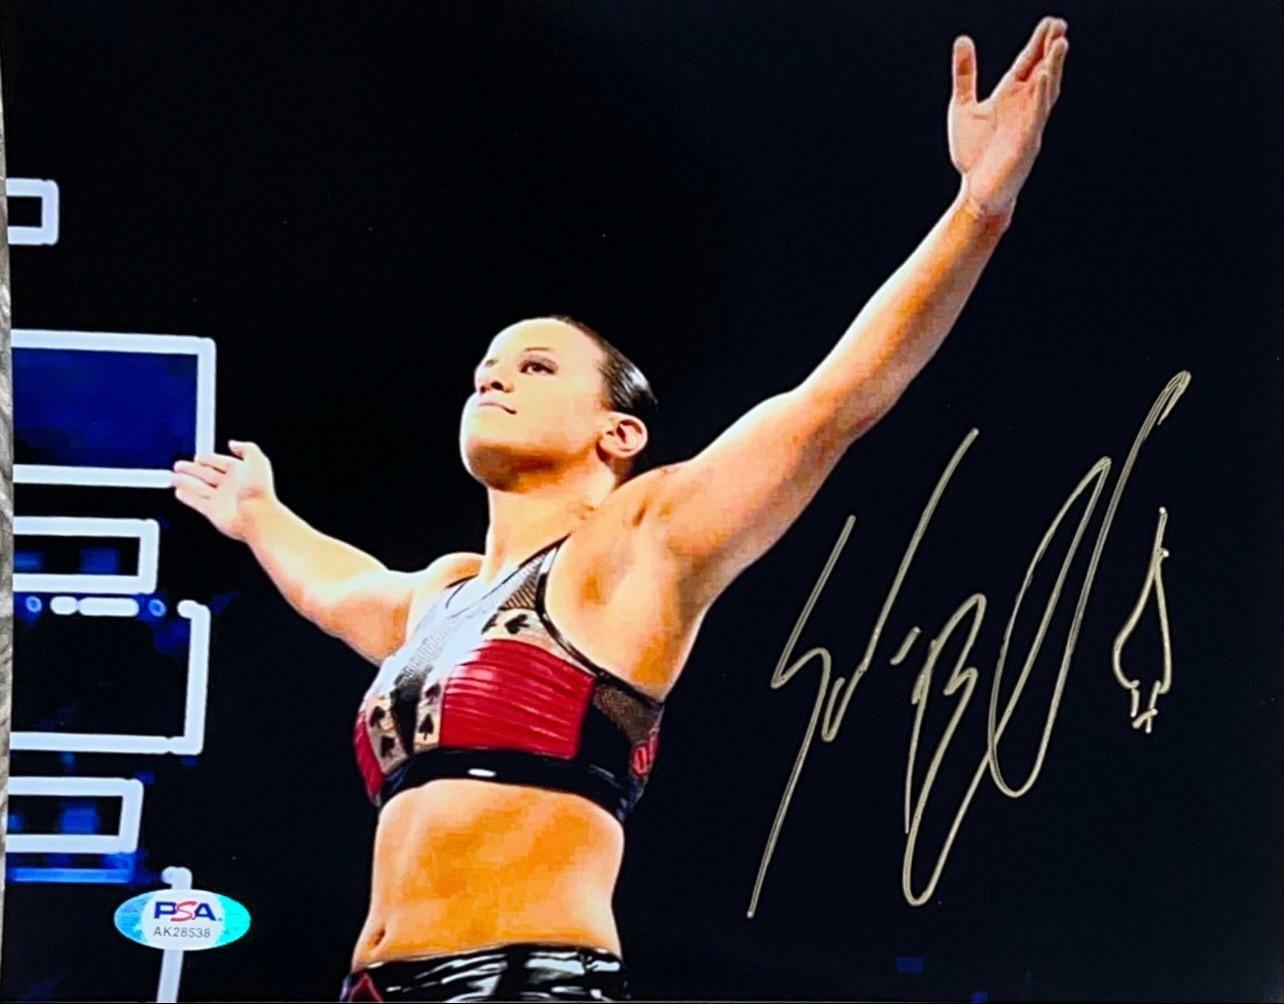 WWE SHAYNA BASZLER HAND SIGNED AUTOGRAPHED 8X10 Photo Poster painting WITH PROOF & PSA COA 9